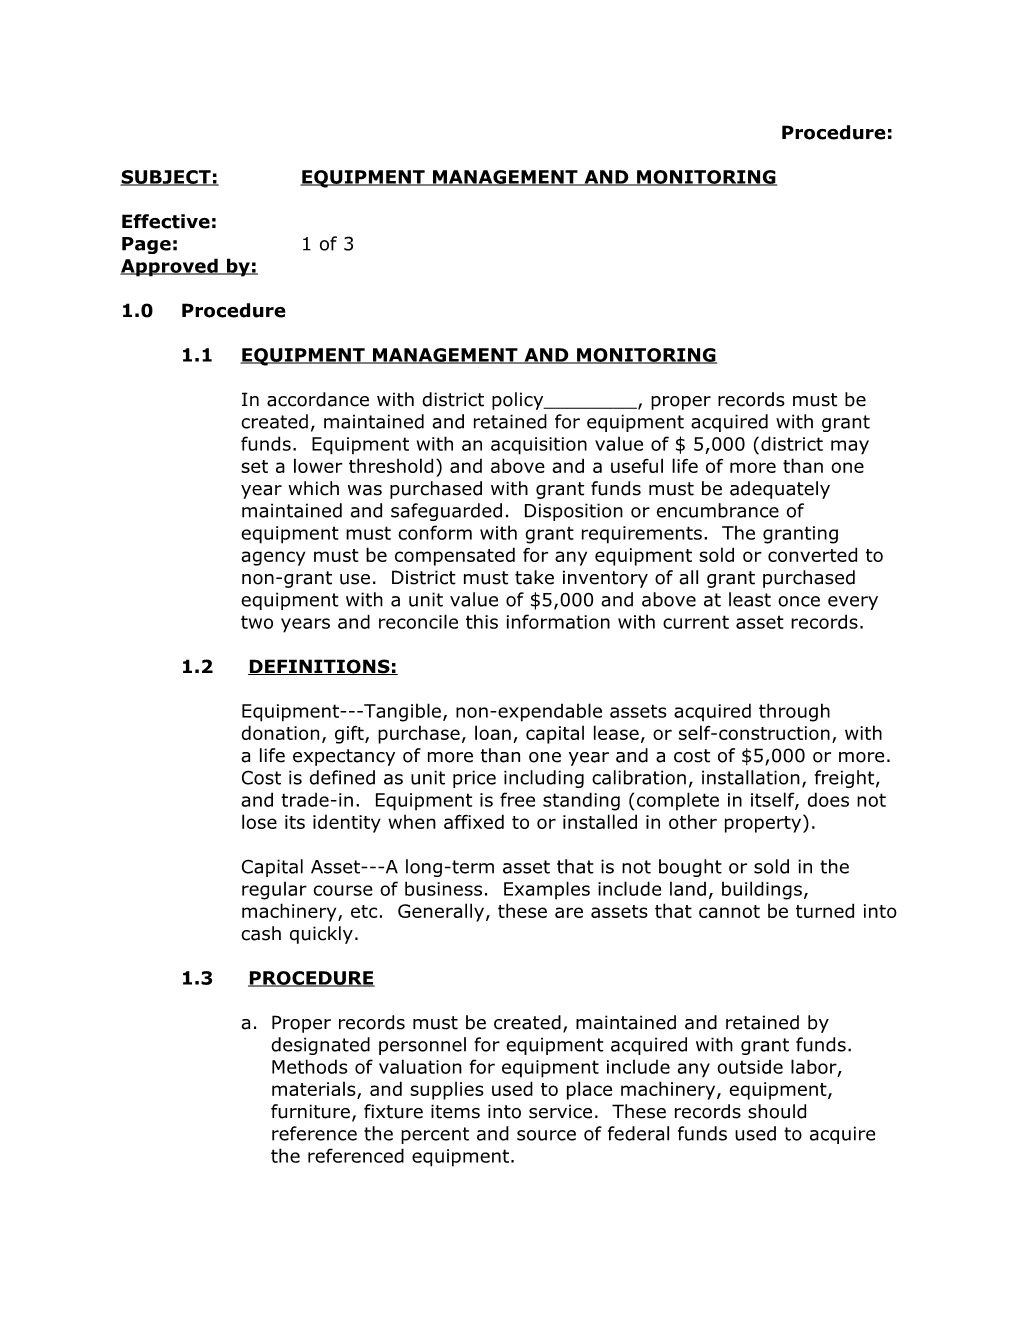 Subject:Equipment Management and Monitoring